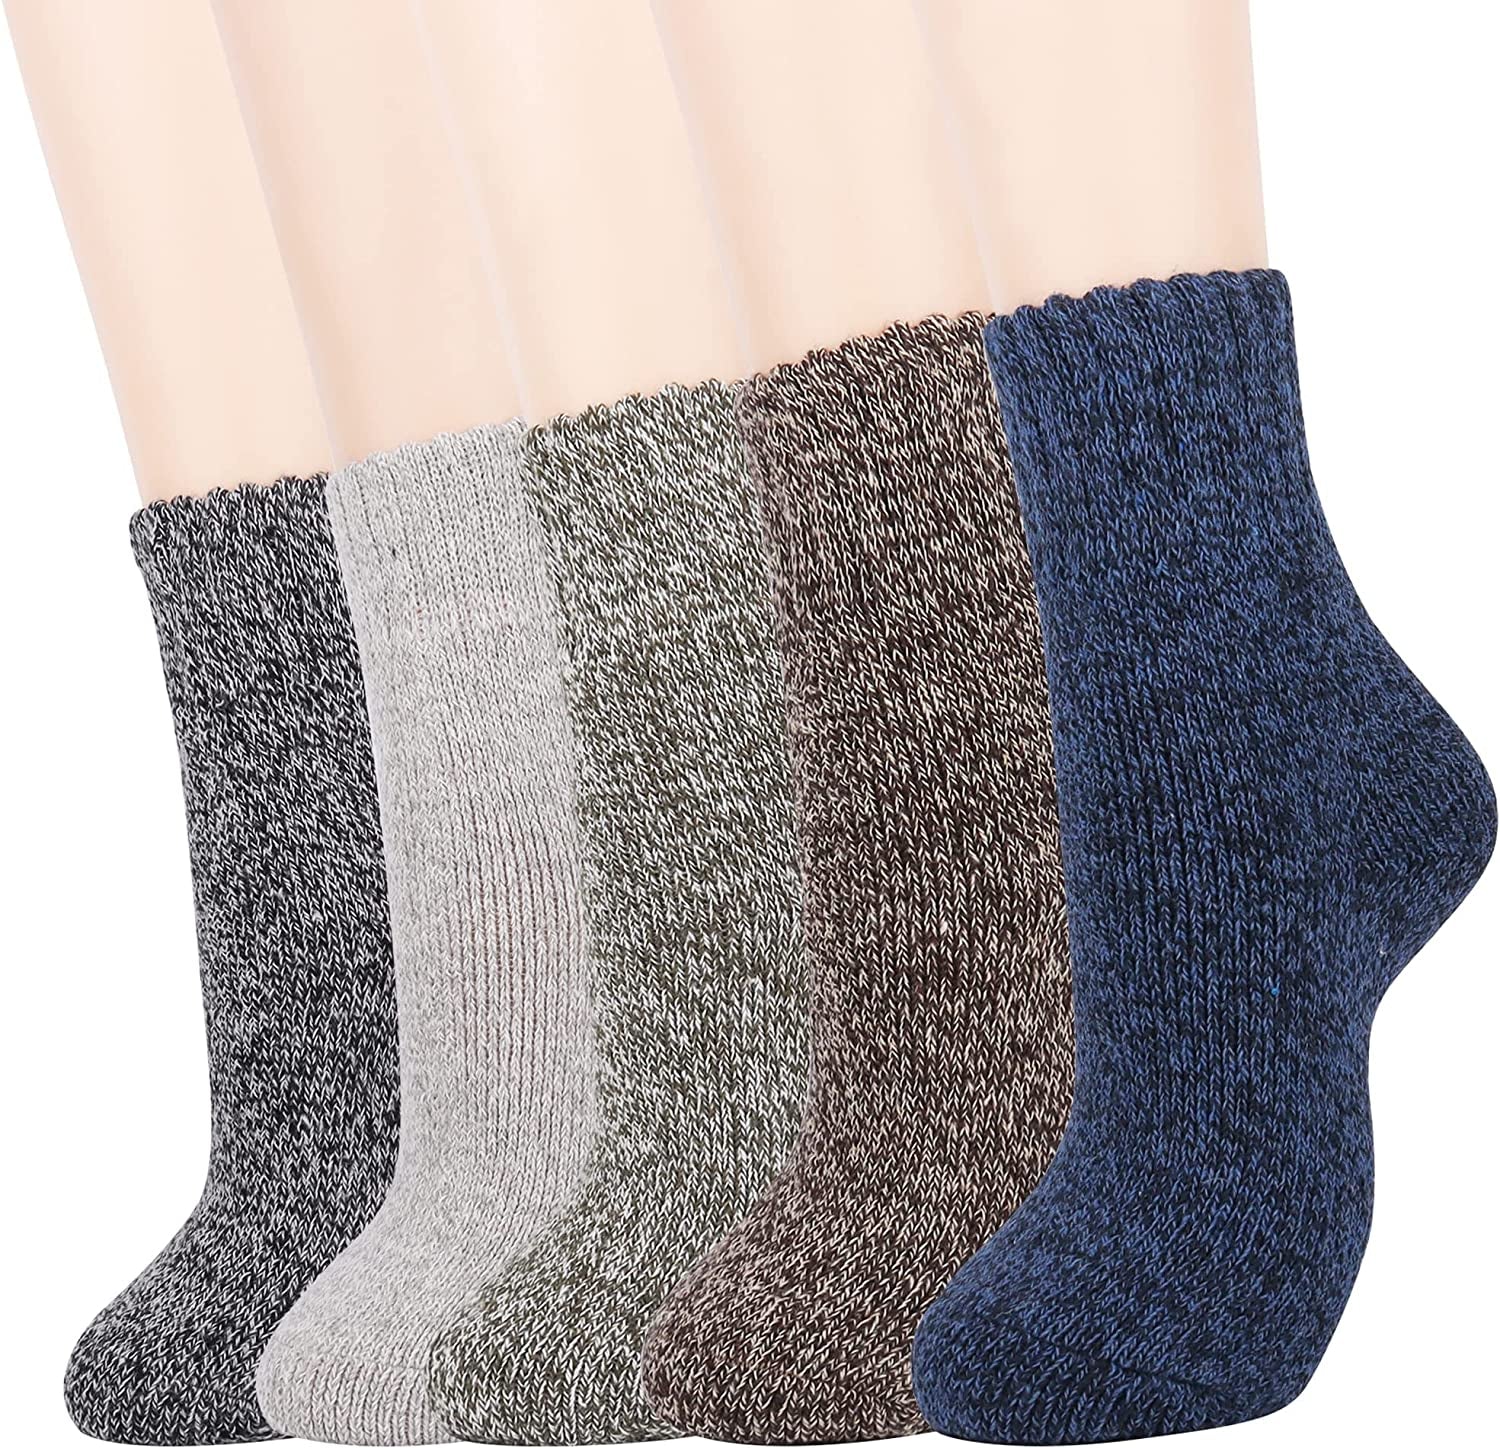 Wool Socks for Women, 5 Pairs of Warm Winter Cozy Thermal Thick Socks